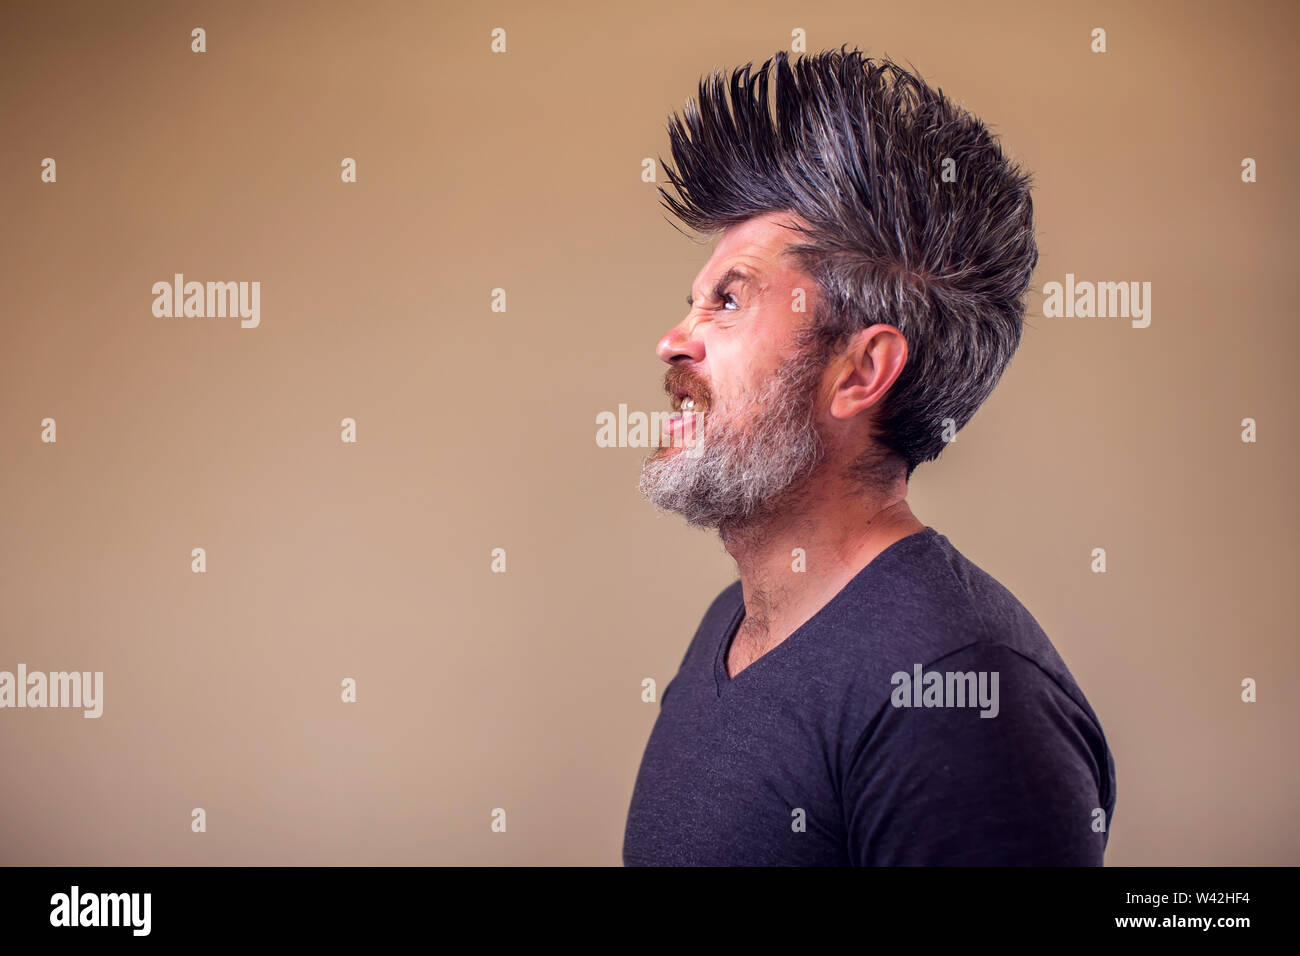 Closeup portrait of an angry adult man with a beard and iroquois. People and emotions concept Stock Photo